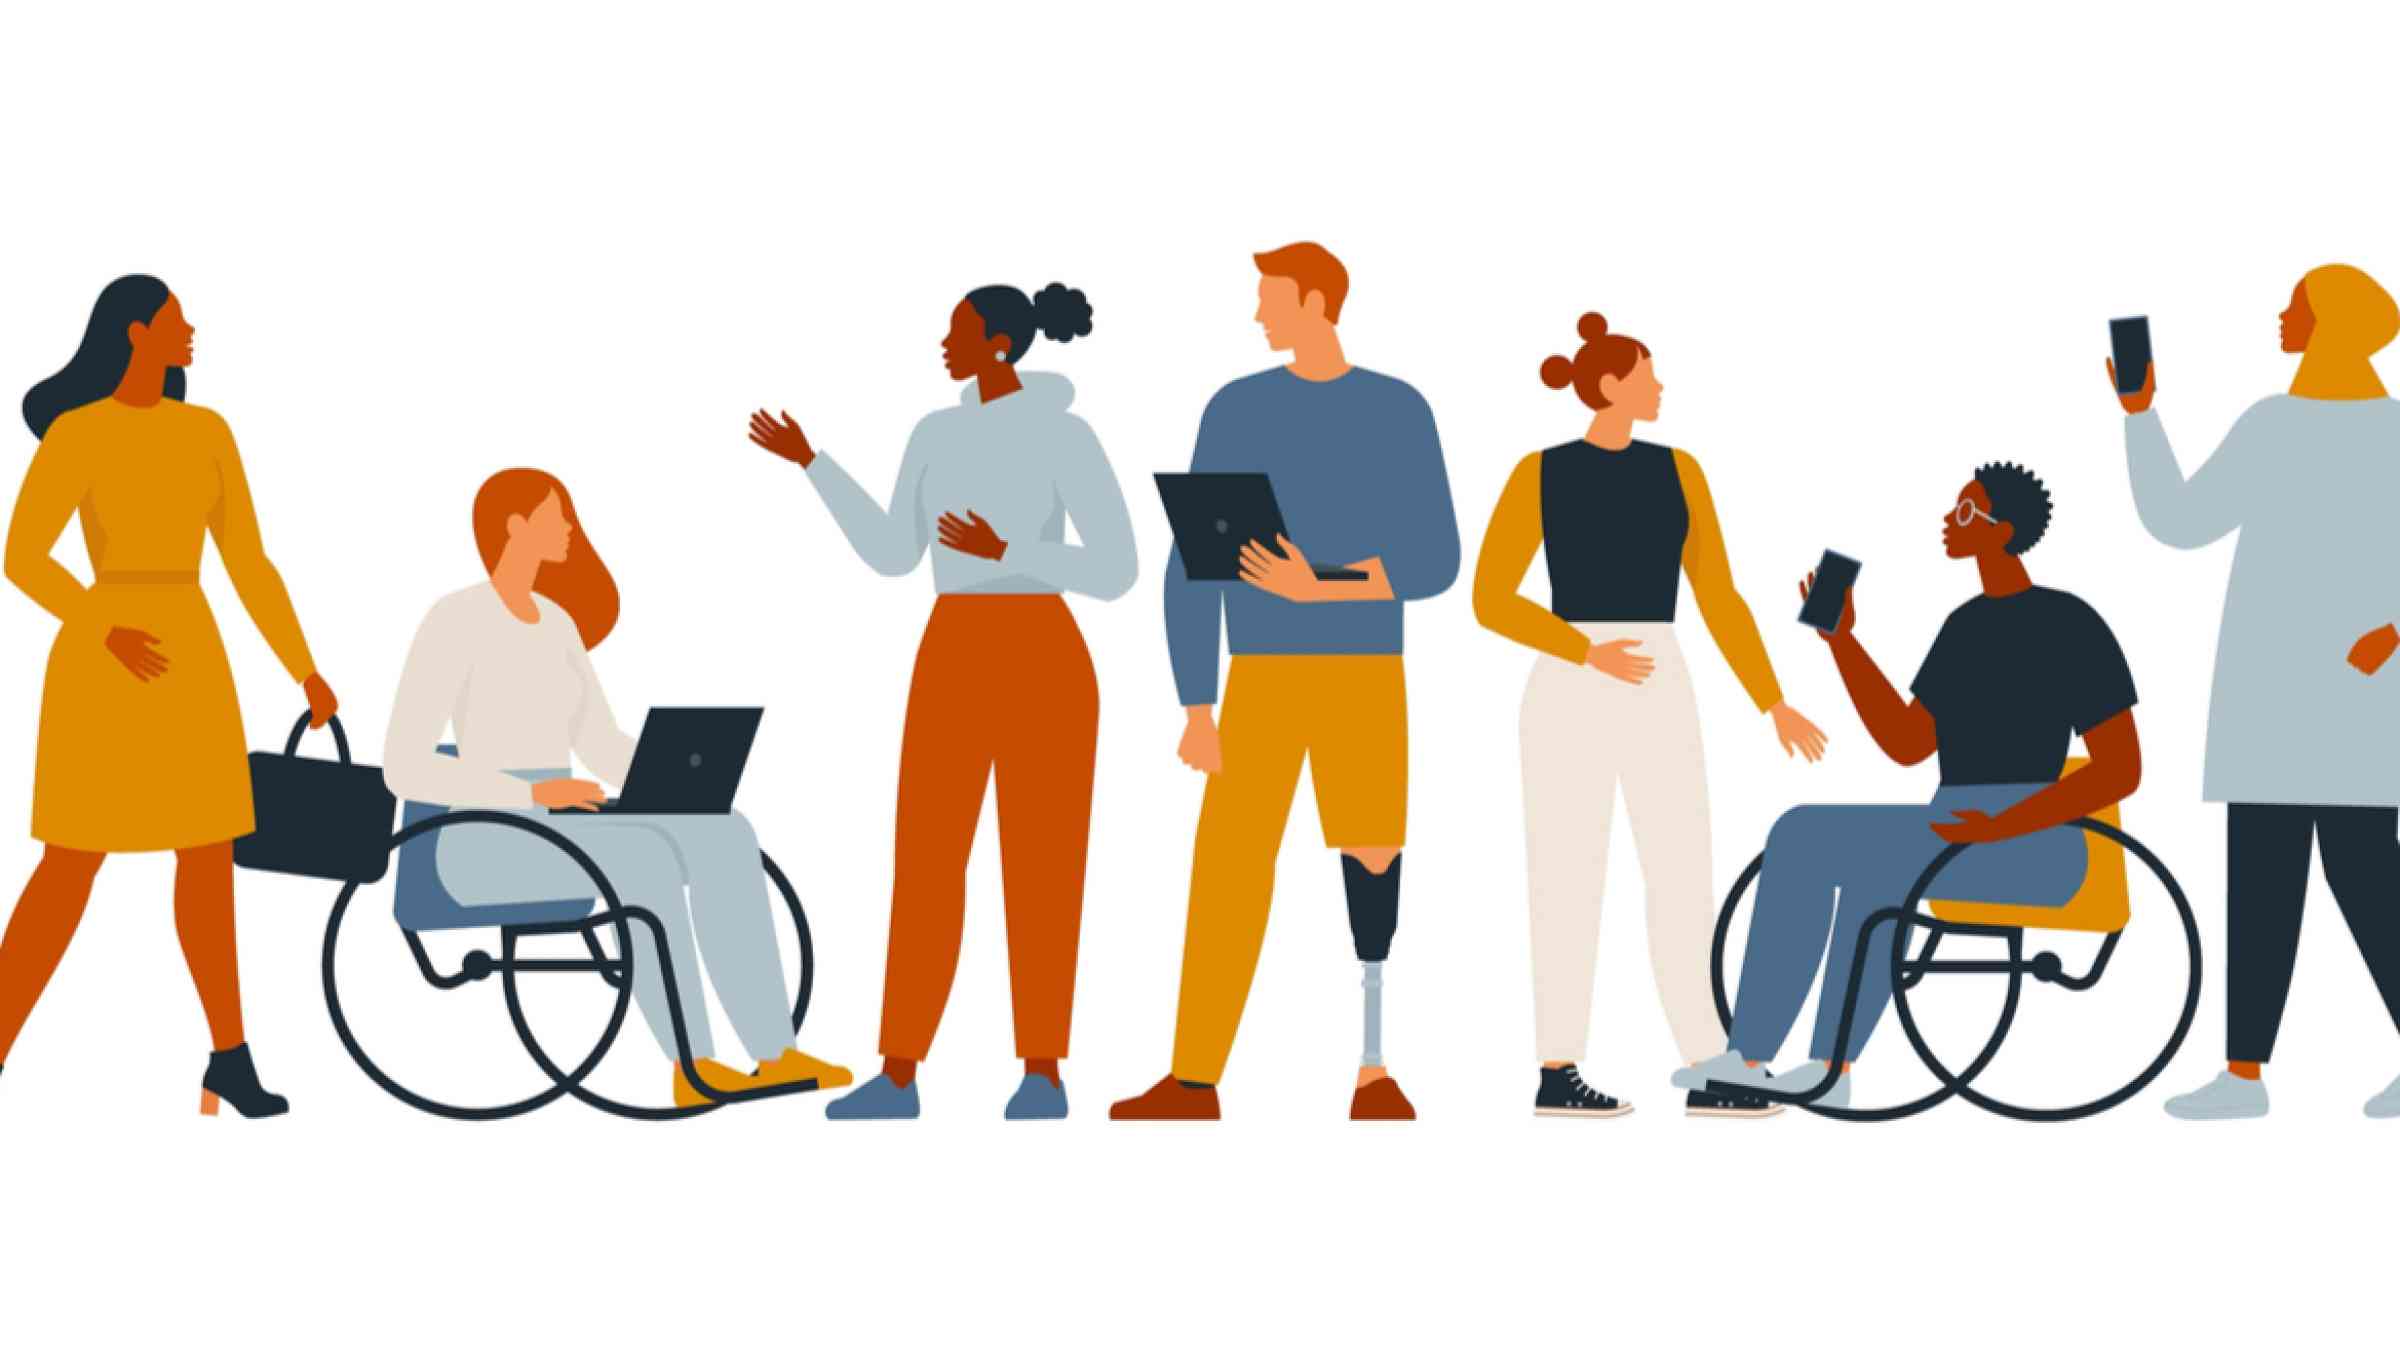 This vector graphic shows a diverse group of people, entrepreneurs, and office workers with different skin colors, genders, and disabilities.